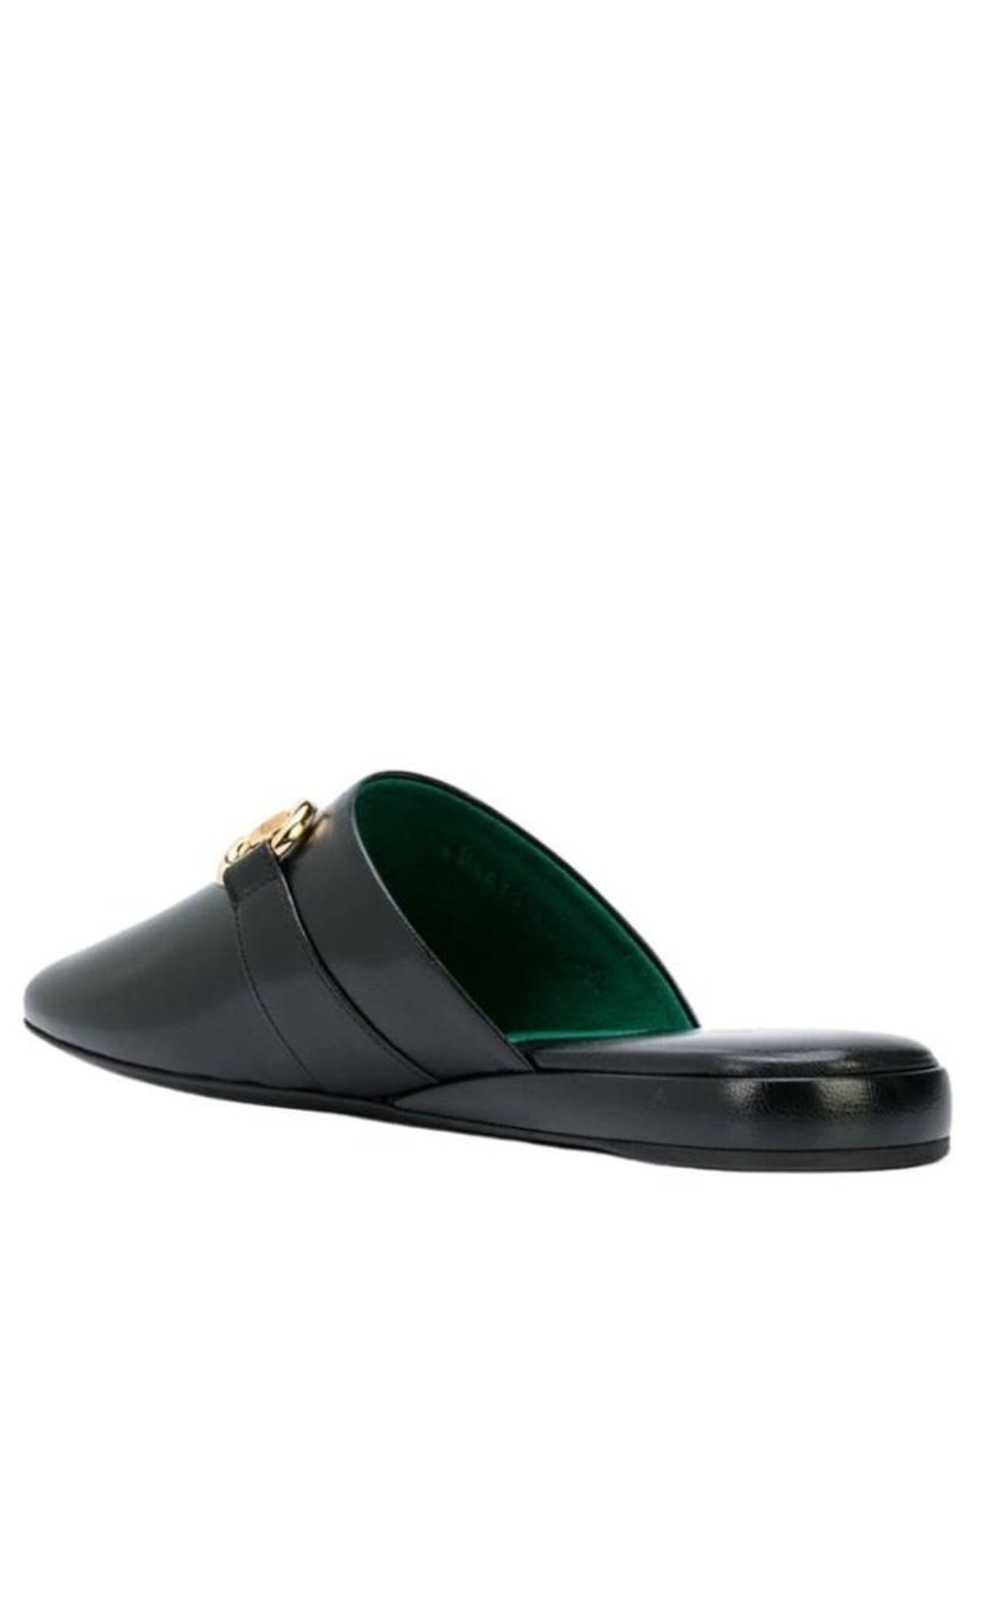 GUCCI Pericle Horsebit Leather Slippers - image 5